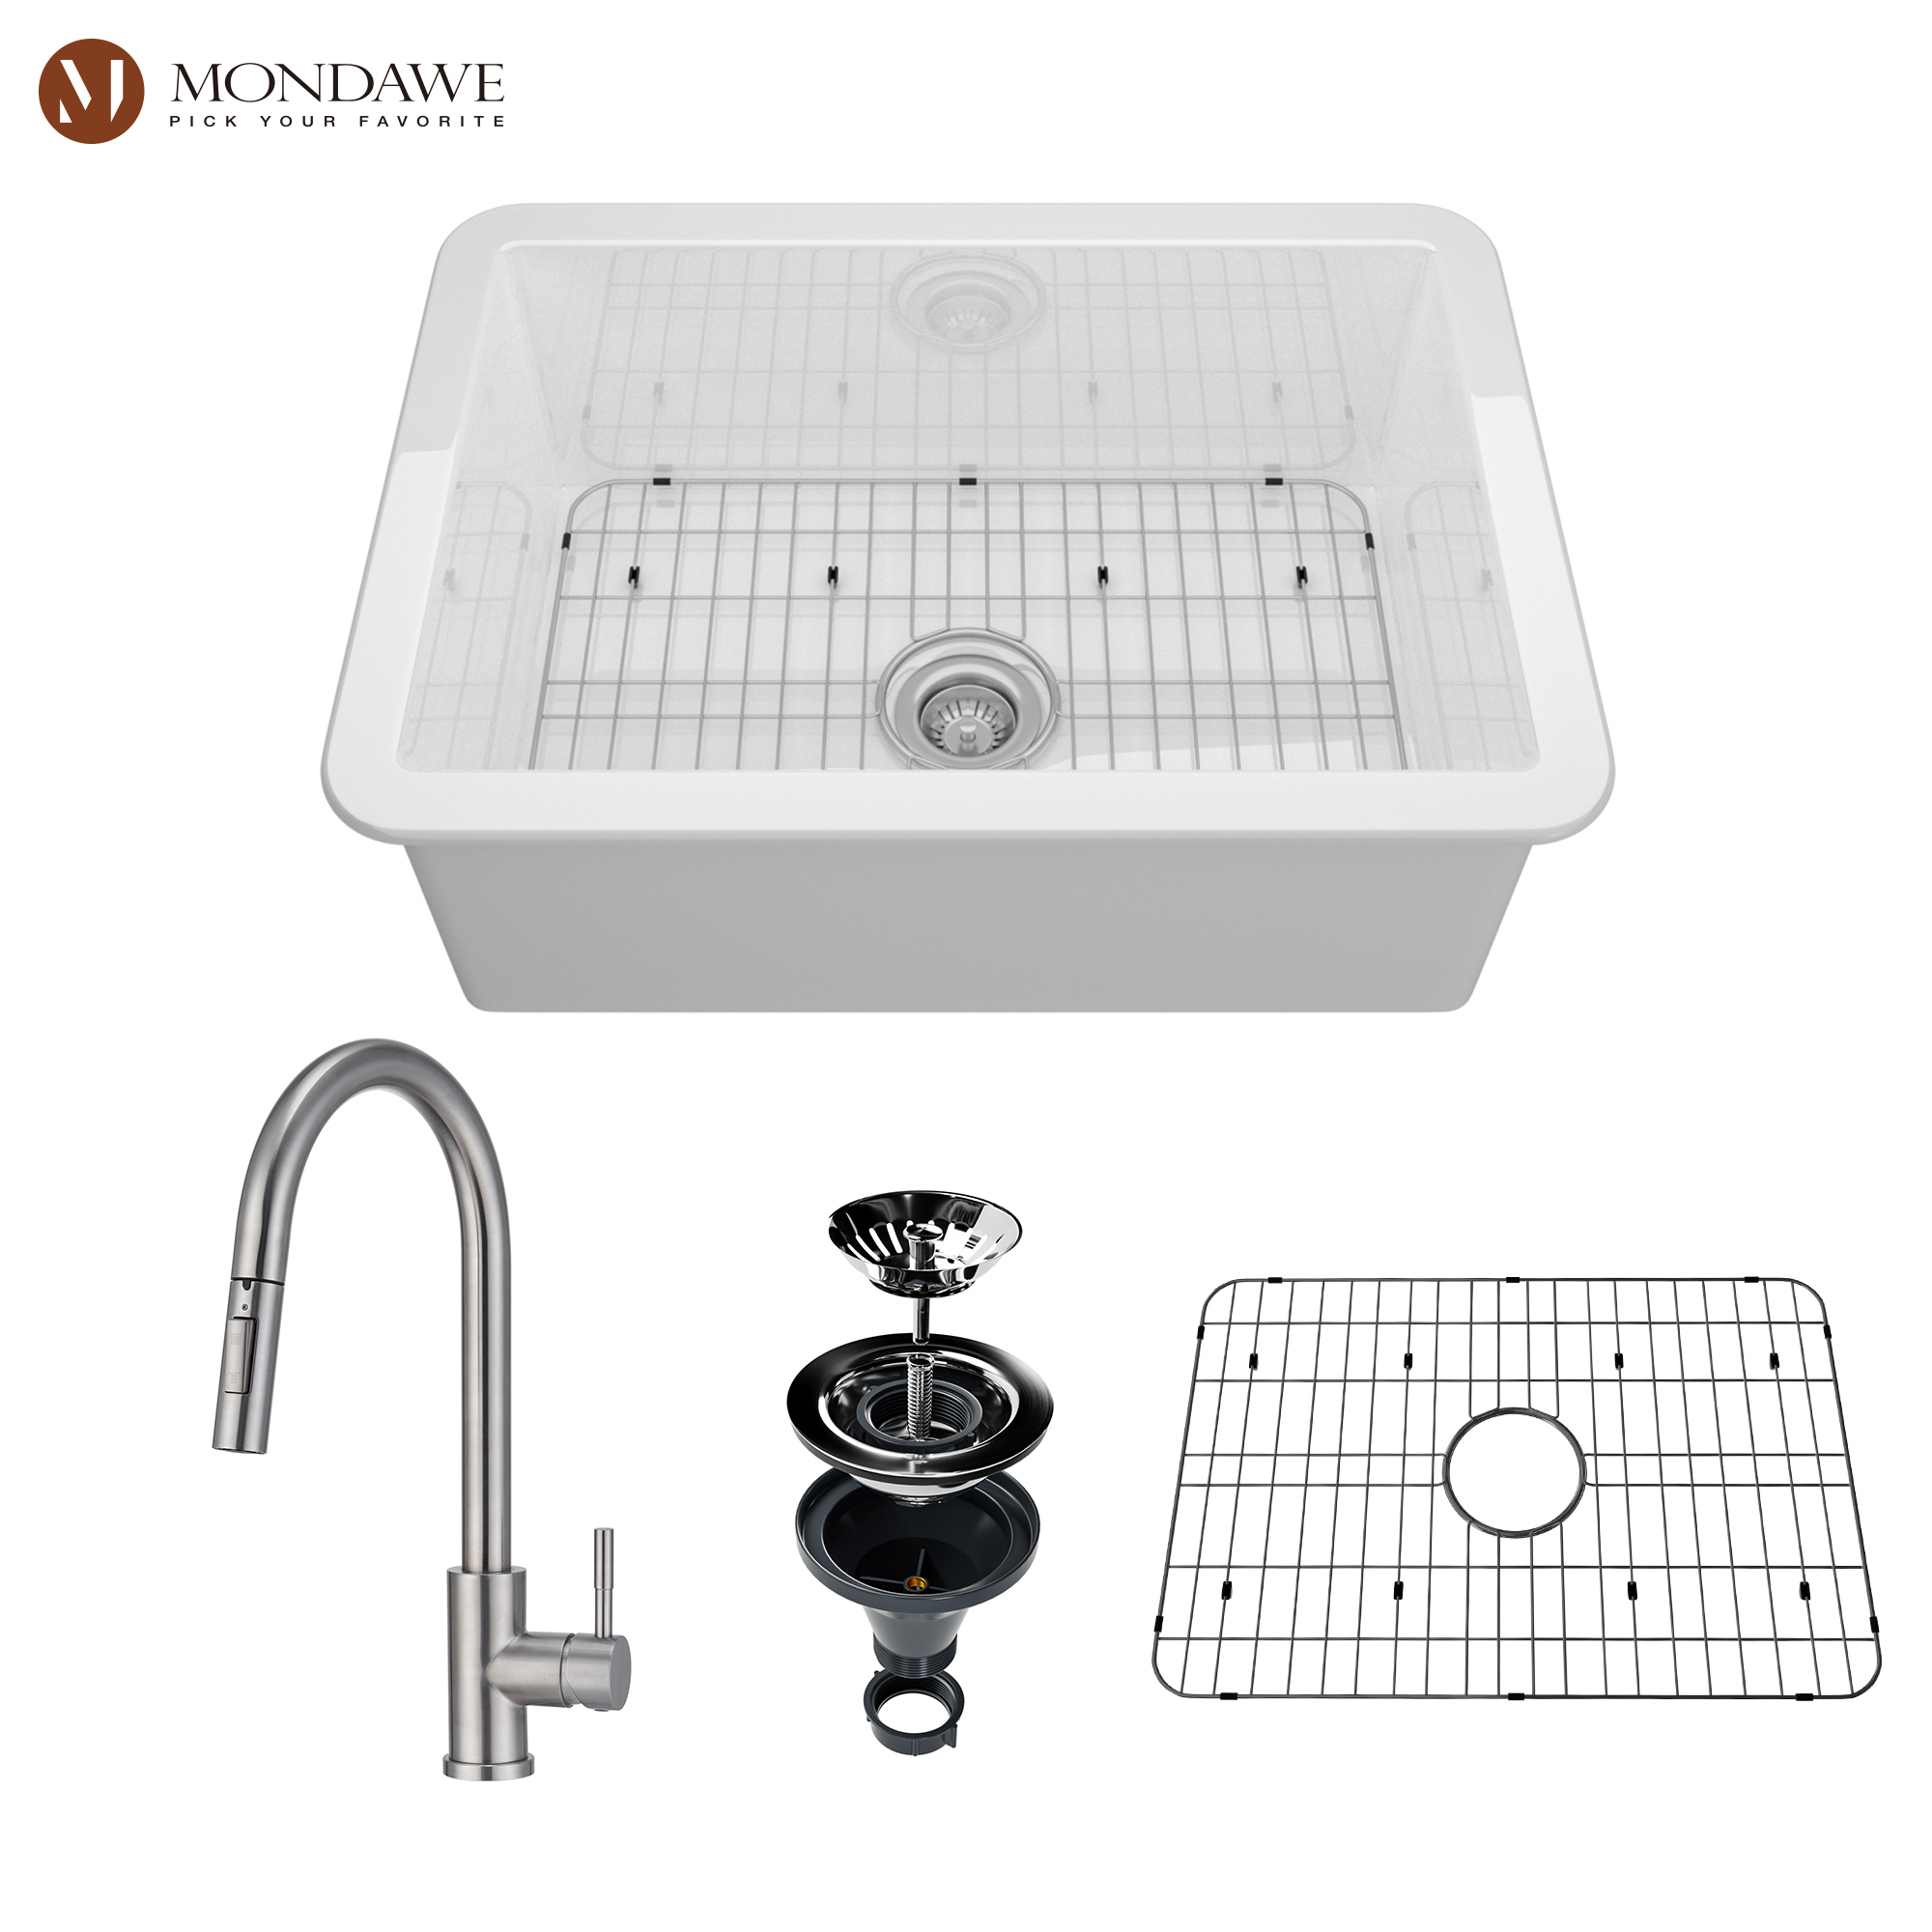 Undermount 27 in. single bowl fireclay kitchen sink in white comes with pull-down faucet-Arrisea